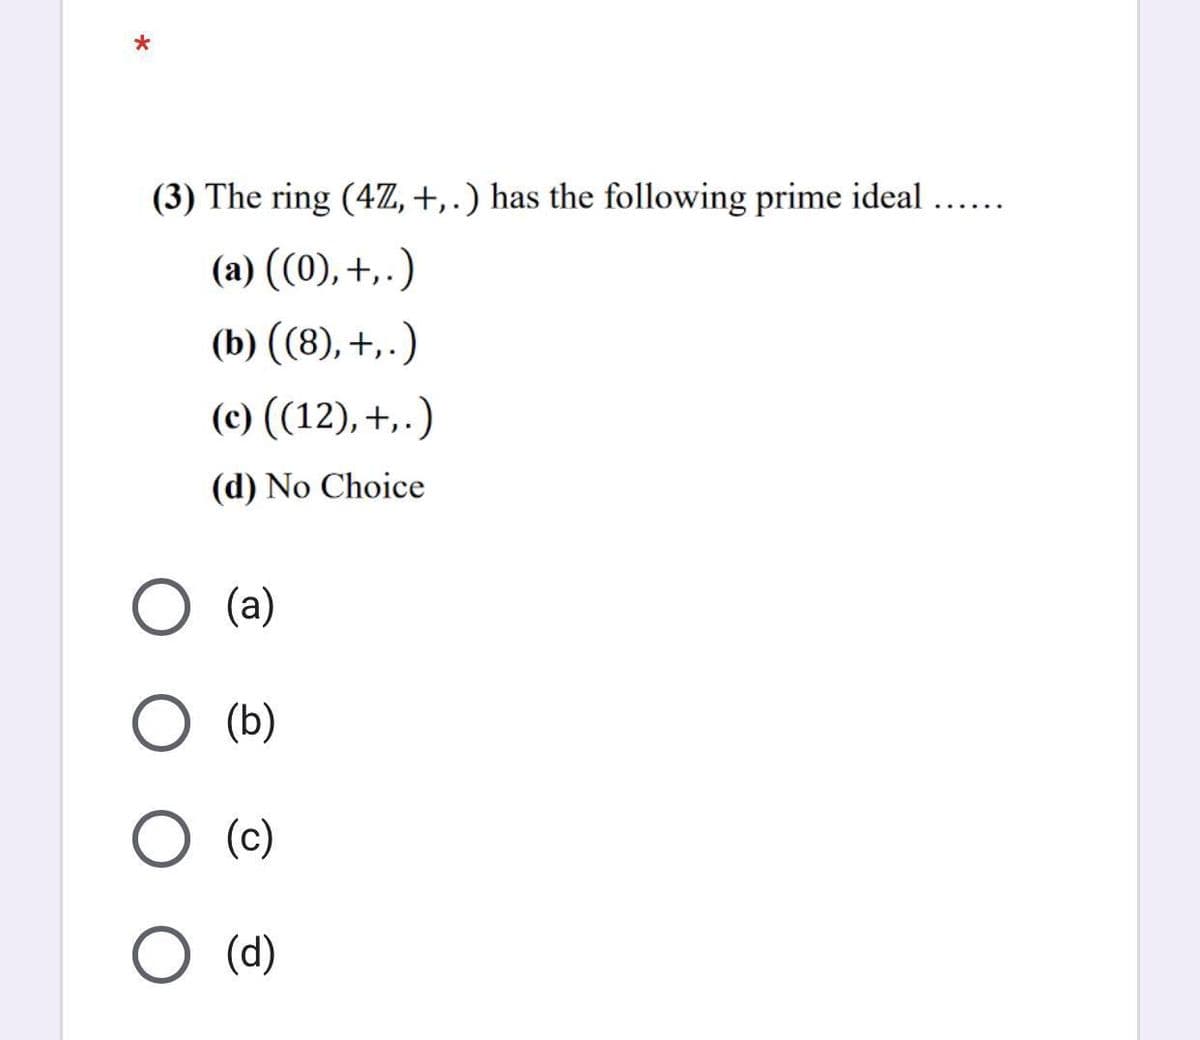 (3) The ring (4Z,+,.) has the following prime ideal ....
(a) ((0), +,.)
(b) ((8), +,.)
(c) ((12), +,.)
(d) No Choice
(а)
(b)
(c)
O (d)
